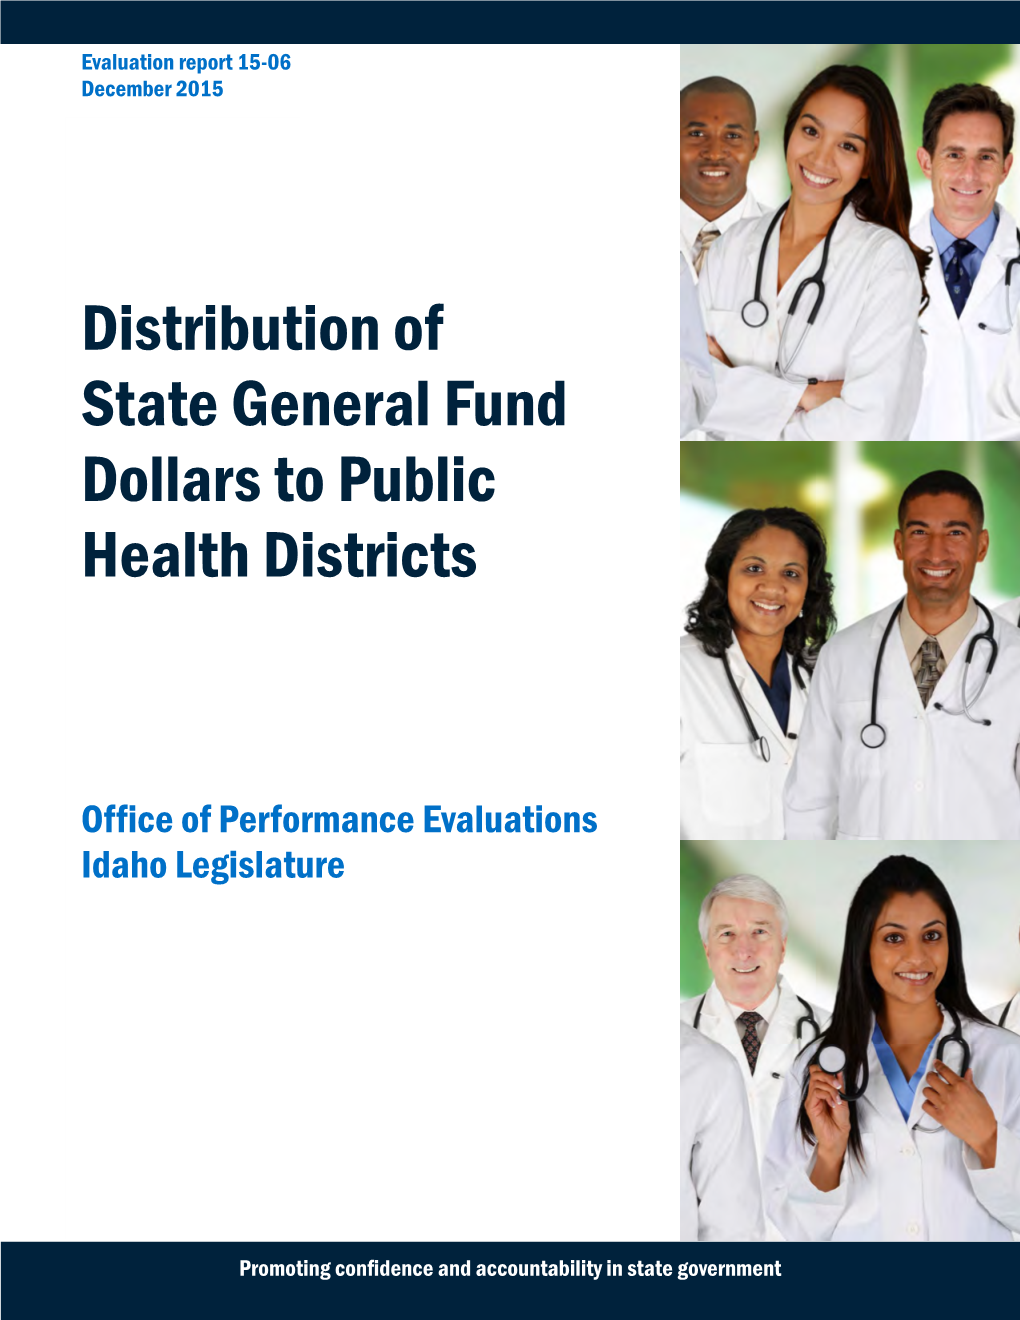 Distribution of State General Fund Dollars to Public Health Districts